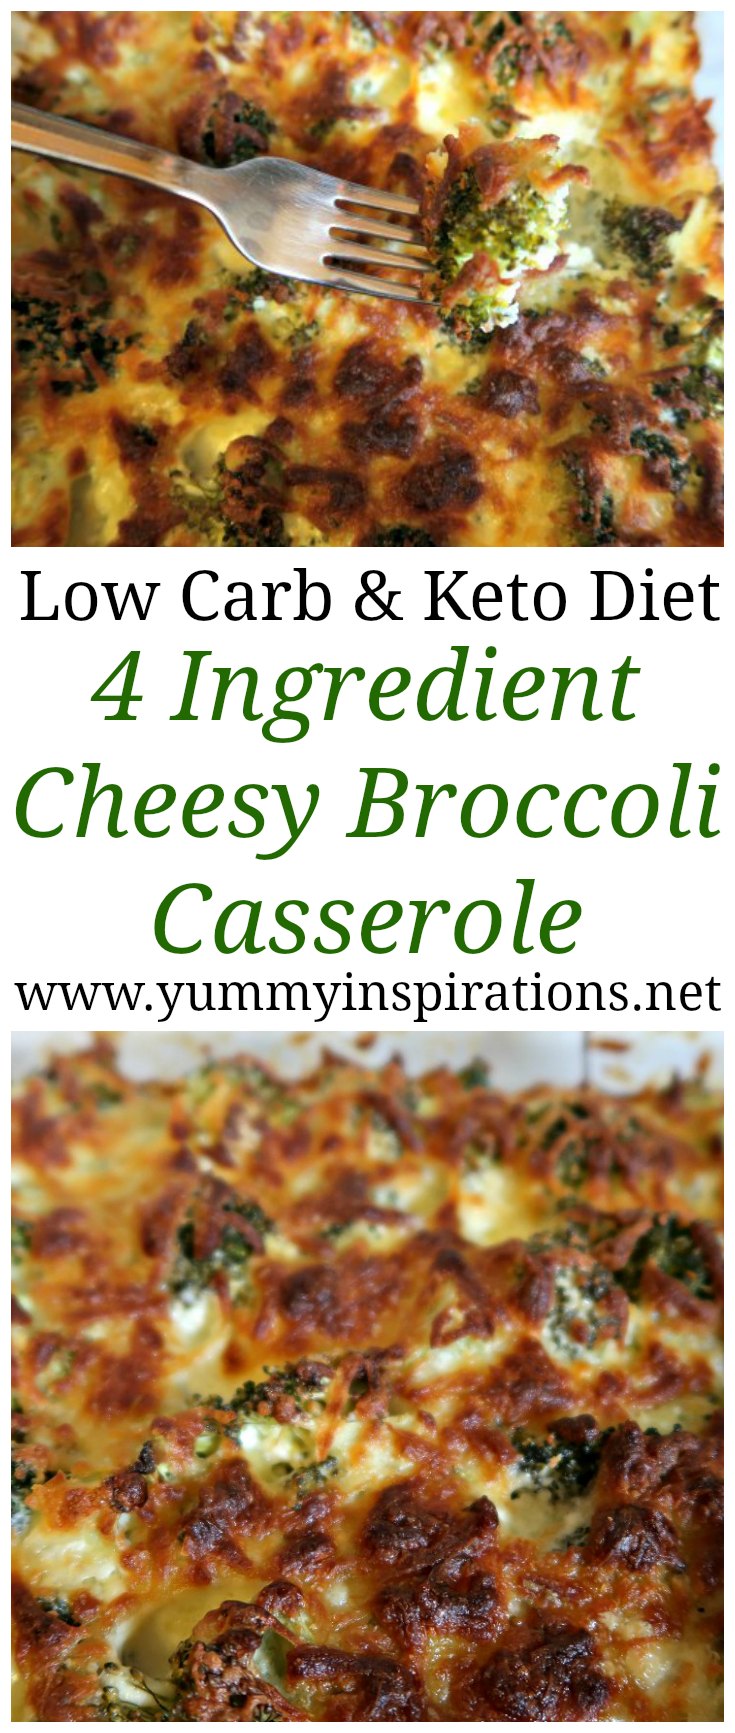 Keto Broccoli Casserole Recipe - Easy 4 Ingredient Low Carb Dinner